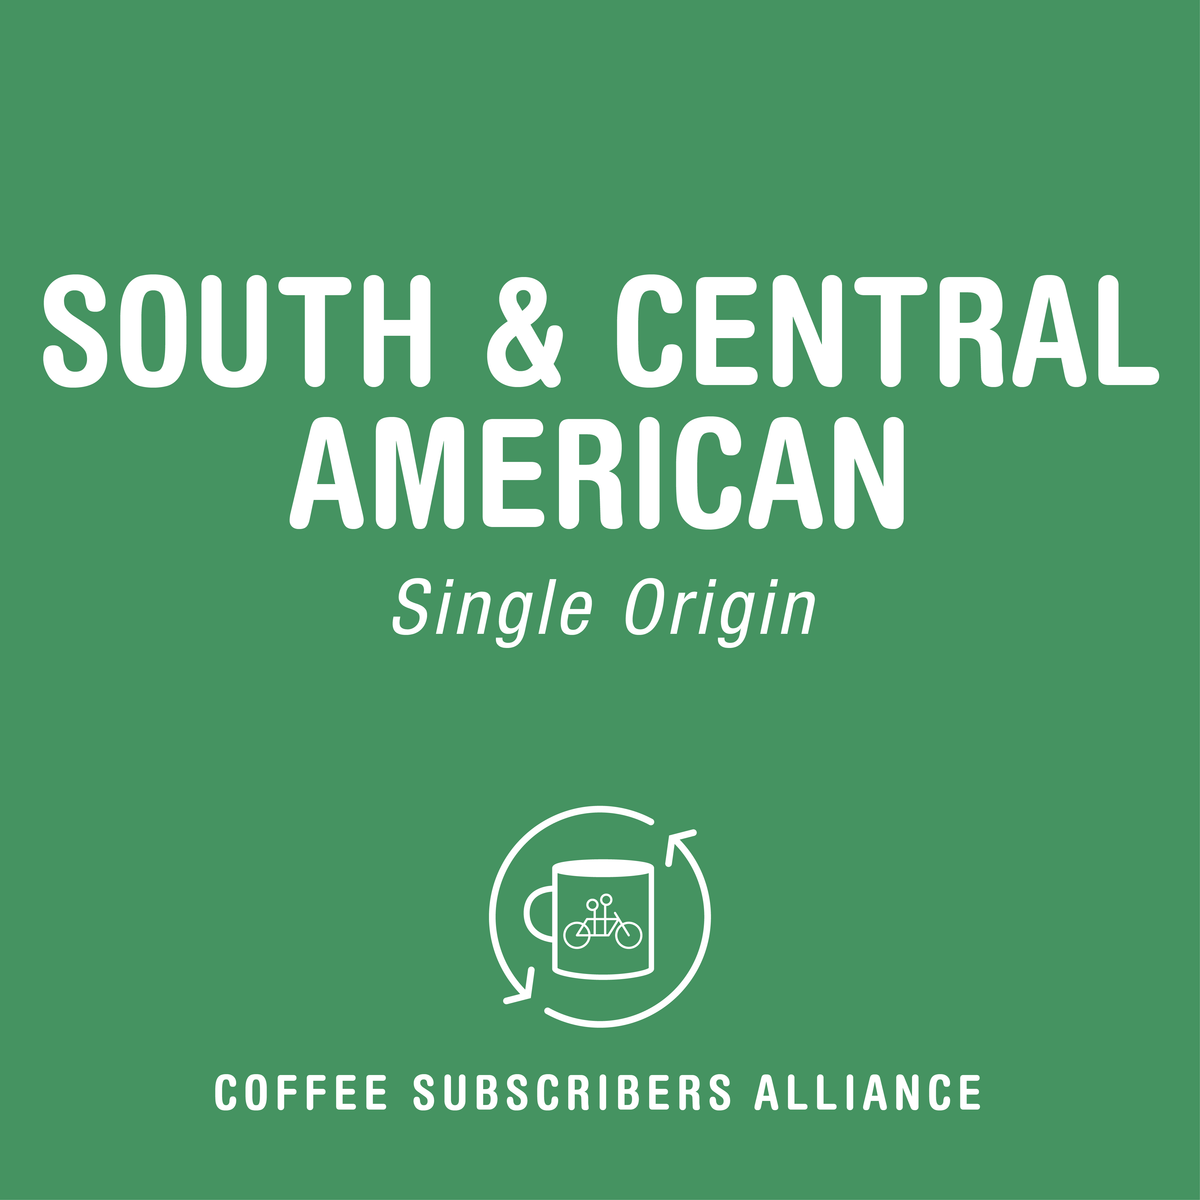 South & Central American Subscription